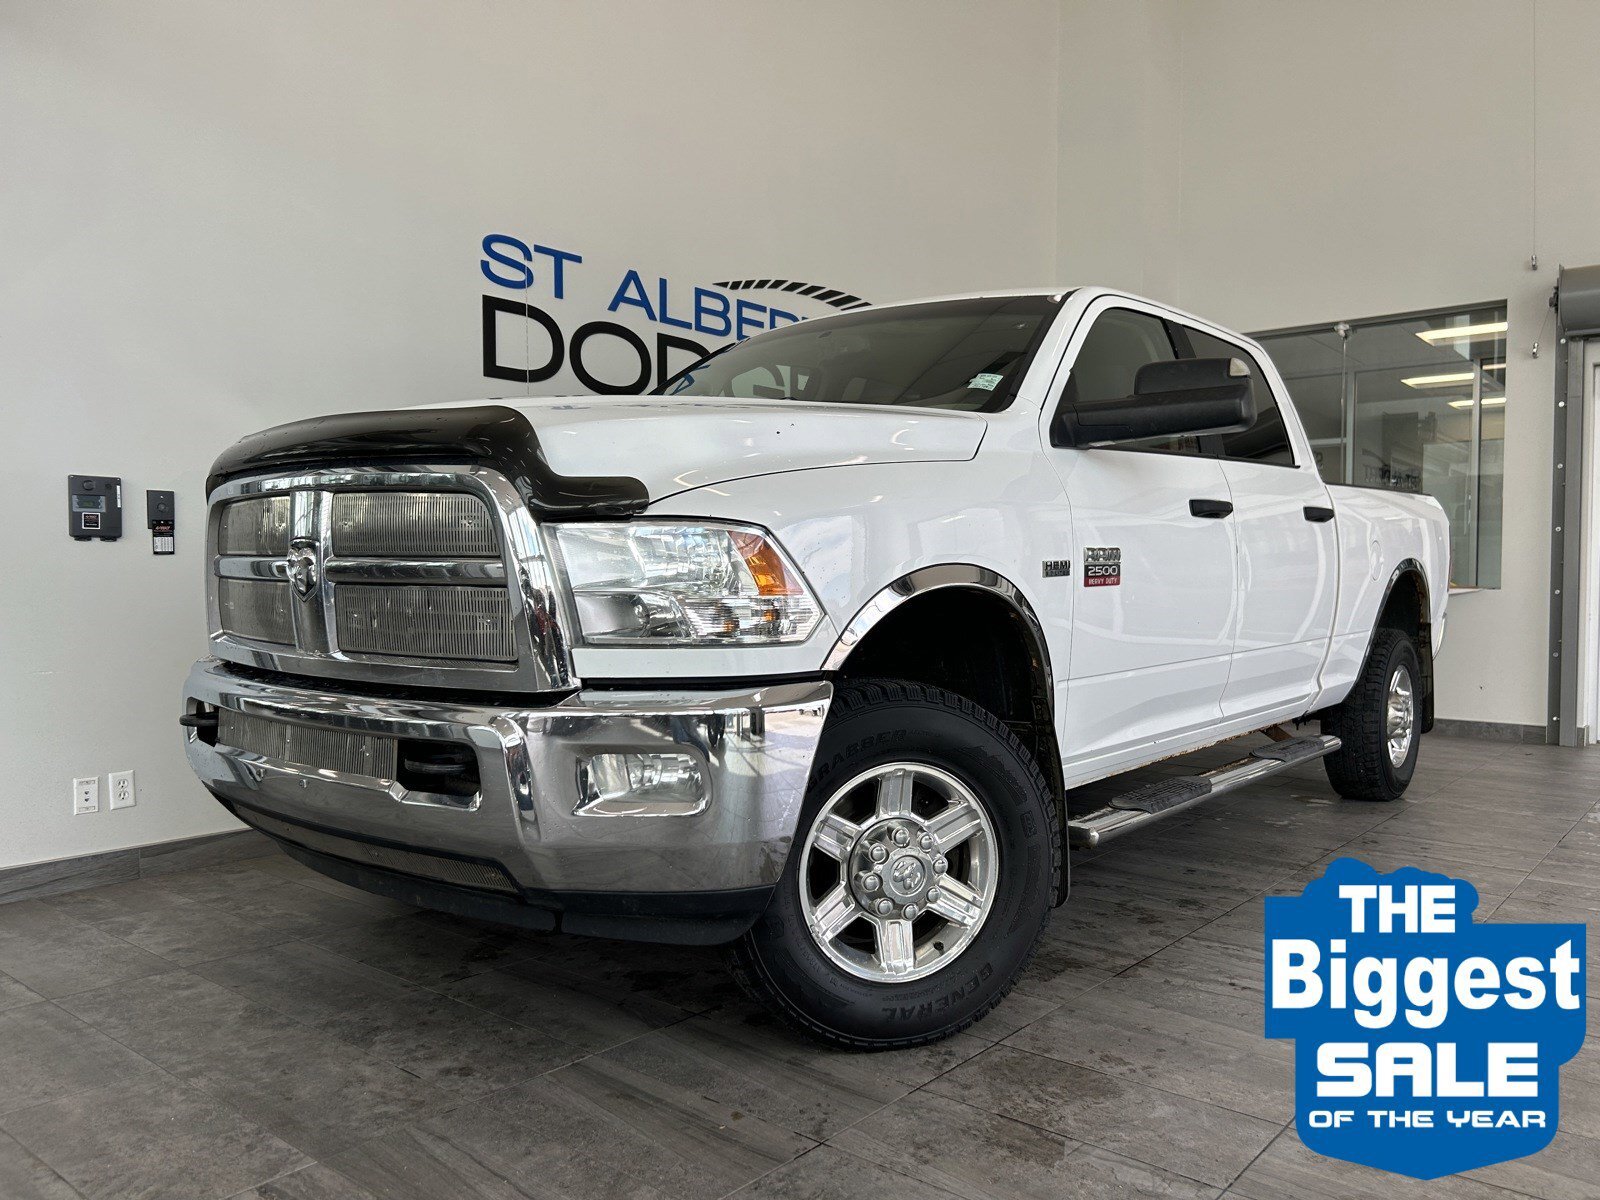 2010 Dodge Ram 2500 SLT| 6.5IN UCONNECT TOUCHSCREEN |